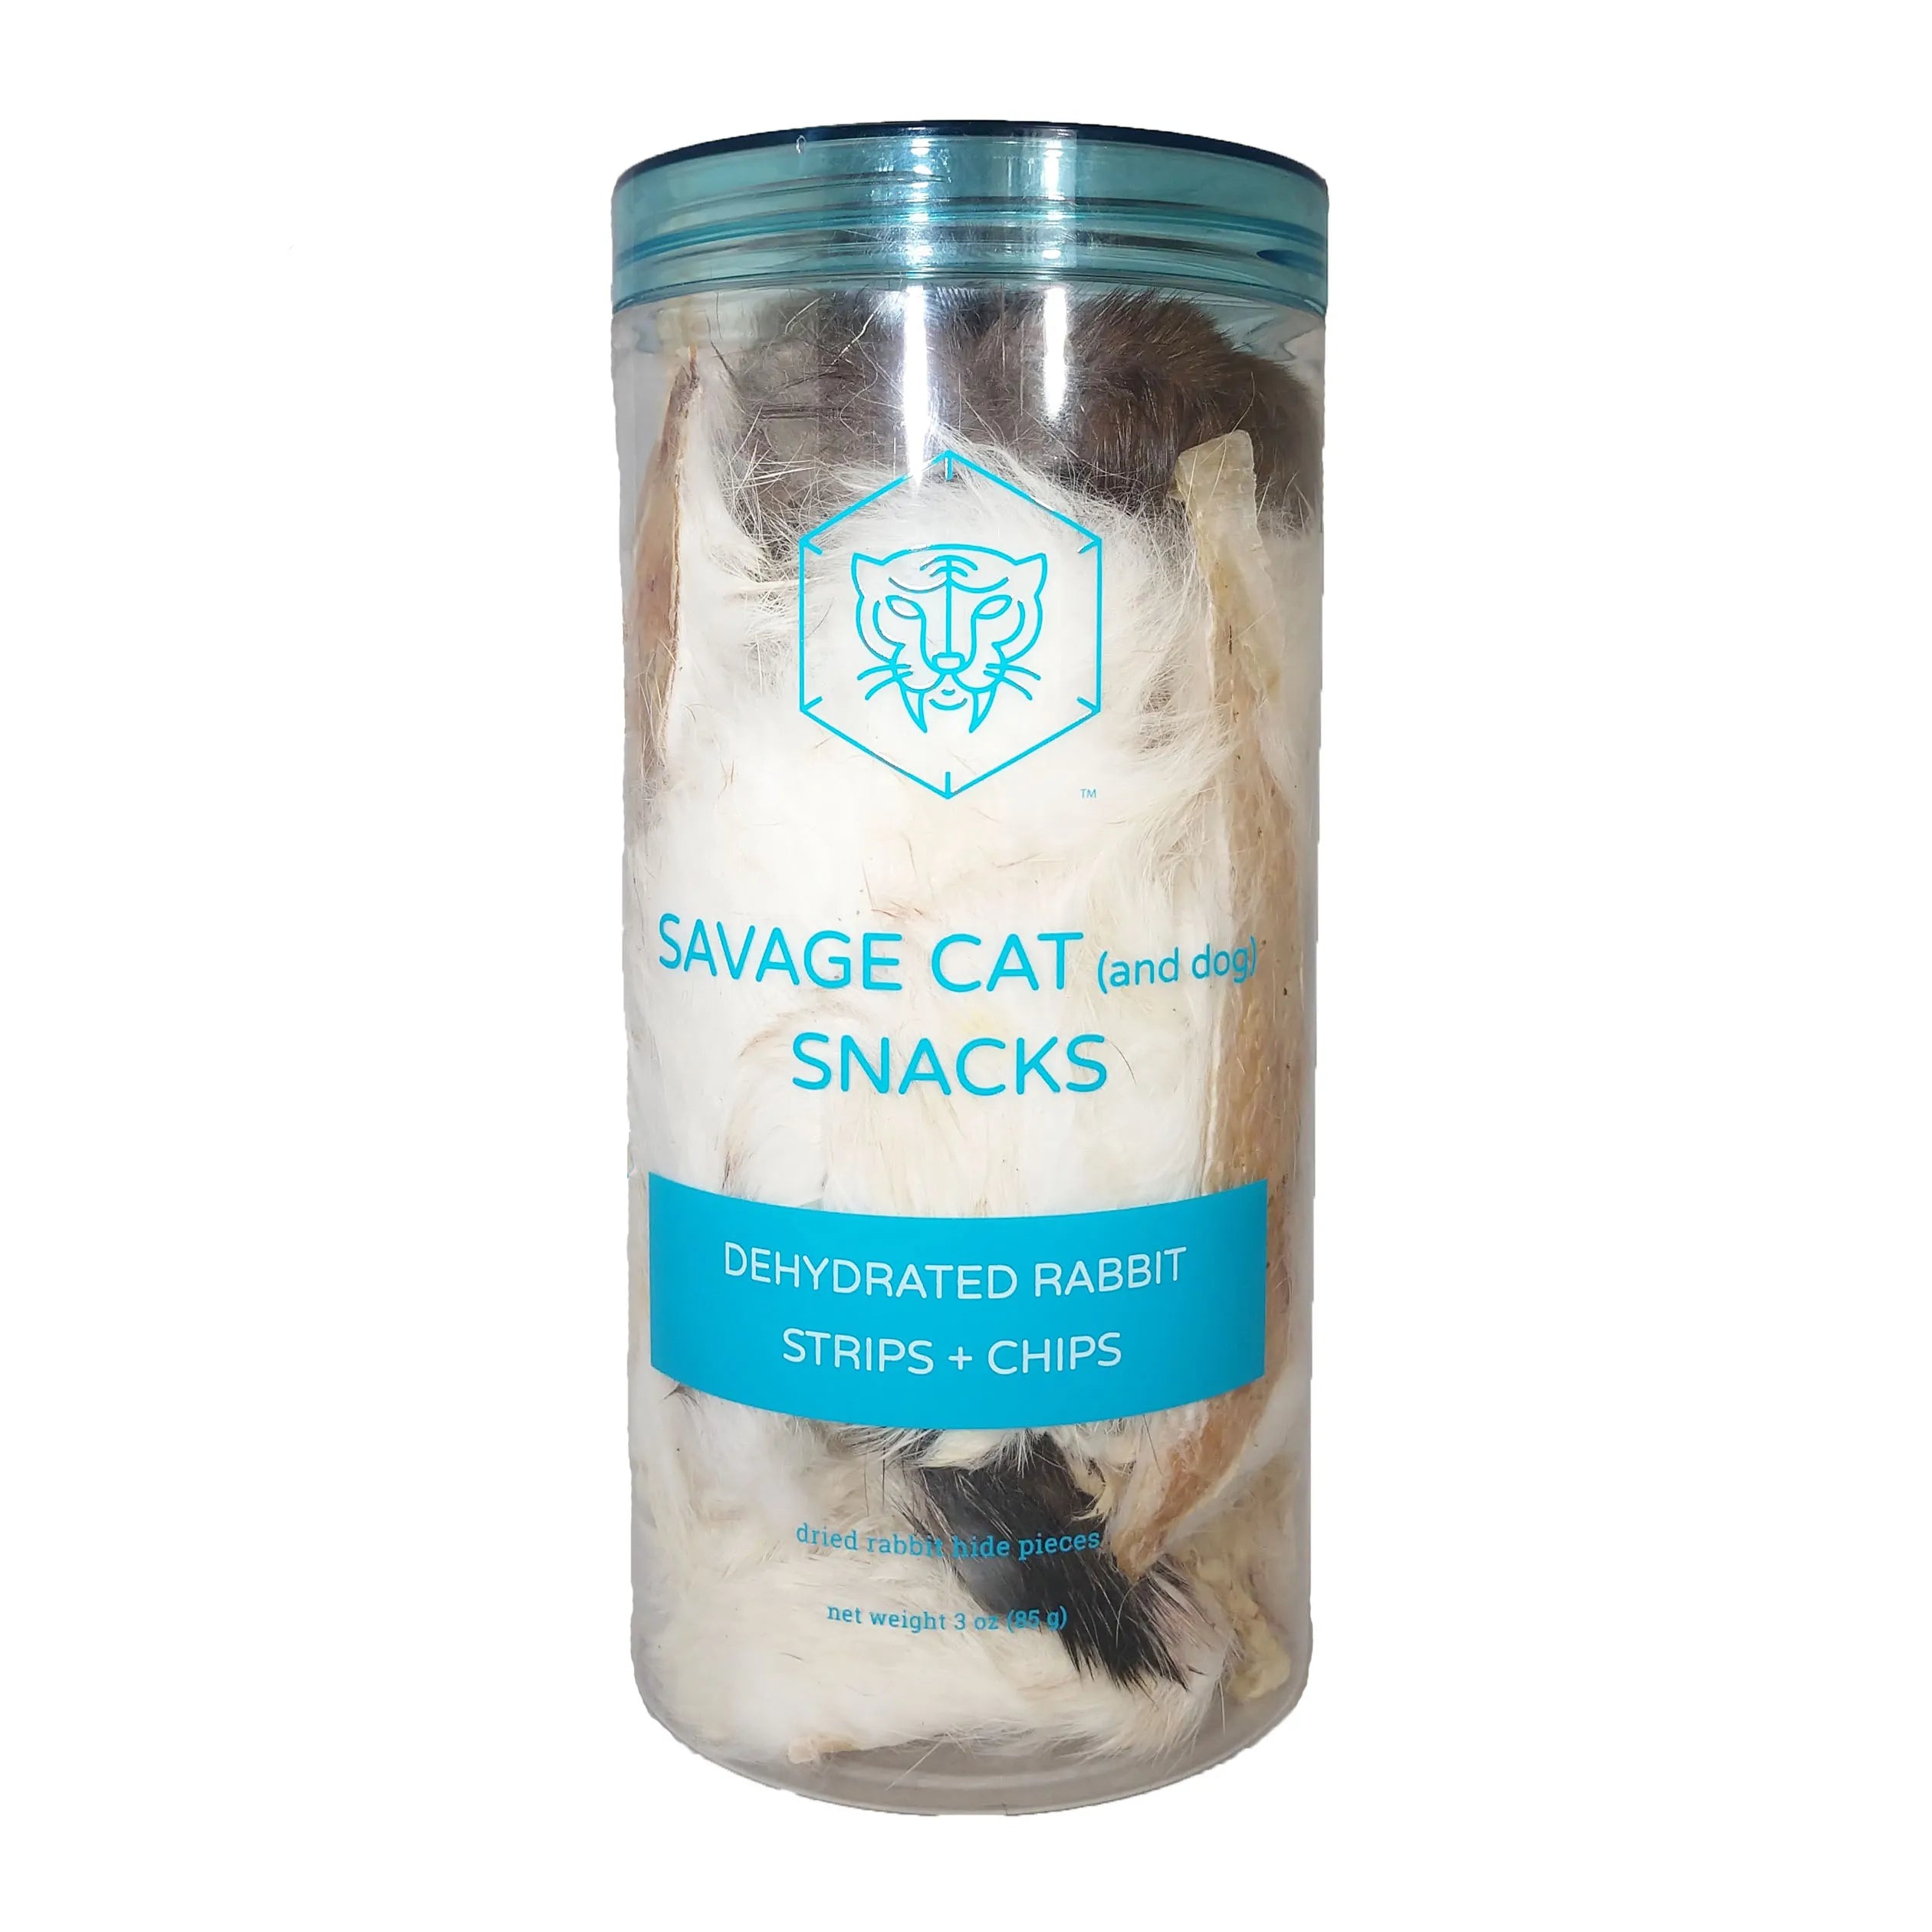 Savage Cat Dehydrated Rabbit Strips and Chips